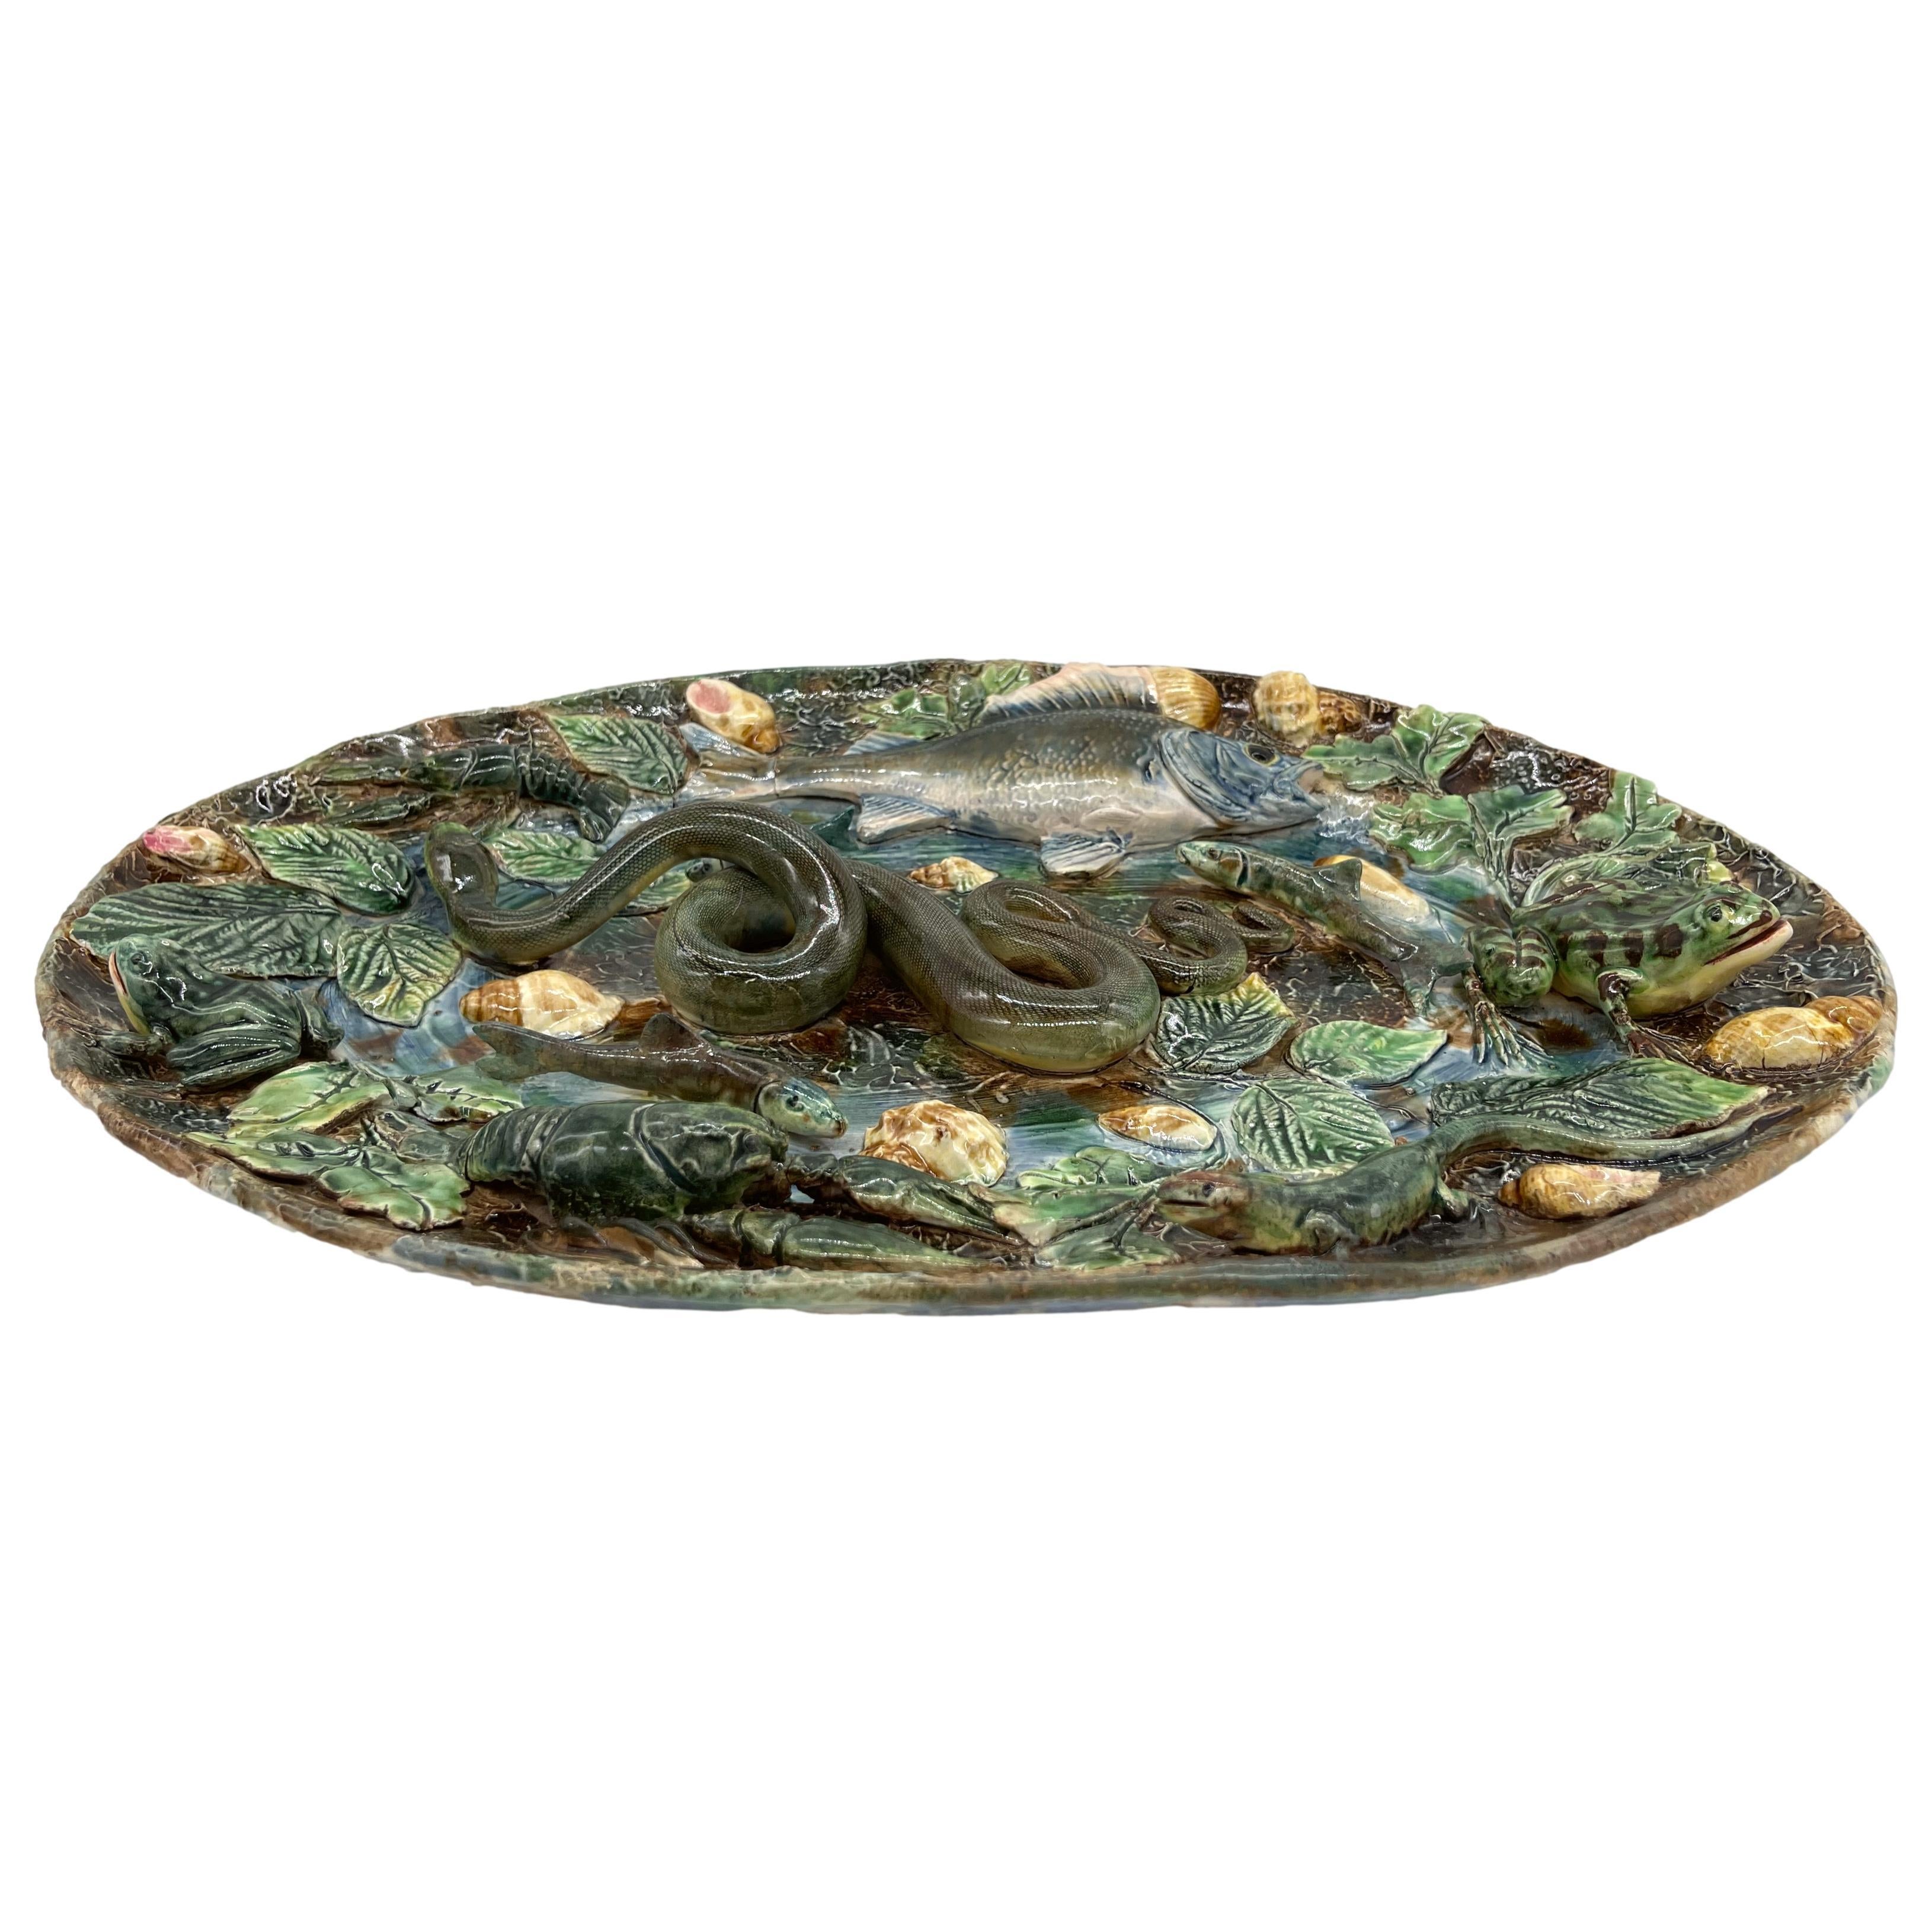 Palissy Ware Trompe L'oeil Oval Platter, Signed Longchamp, French, ca. 1875 For Sale 6